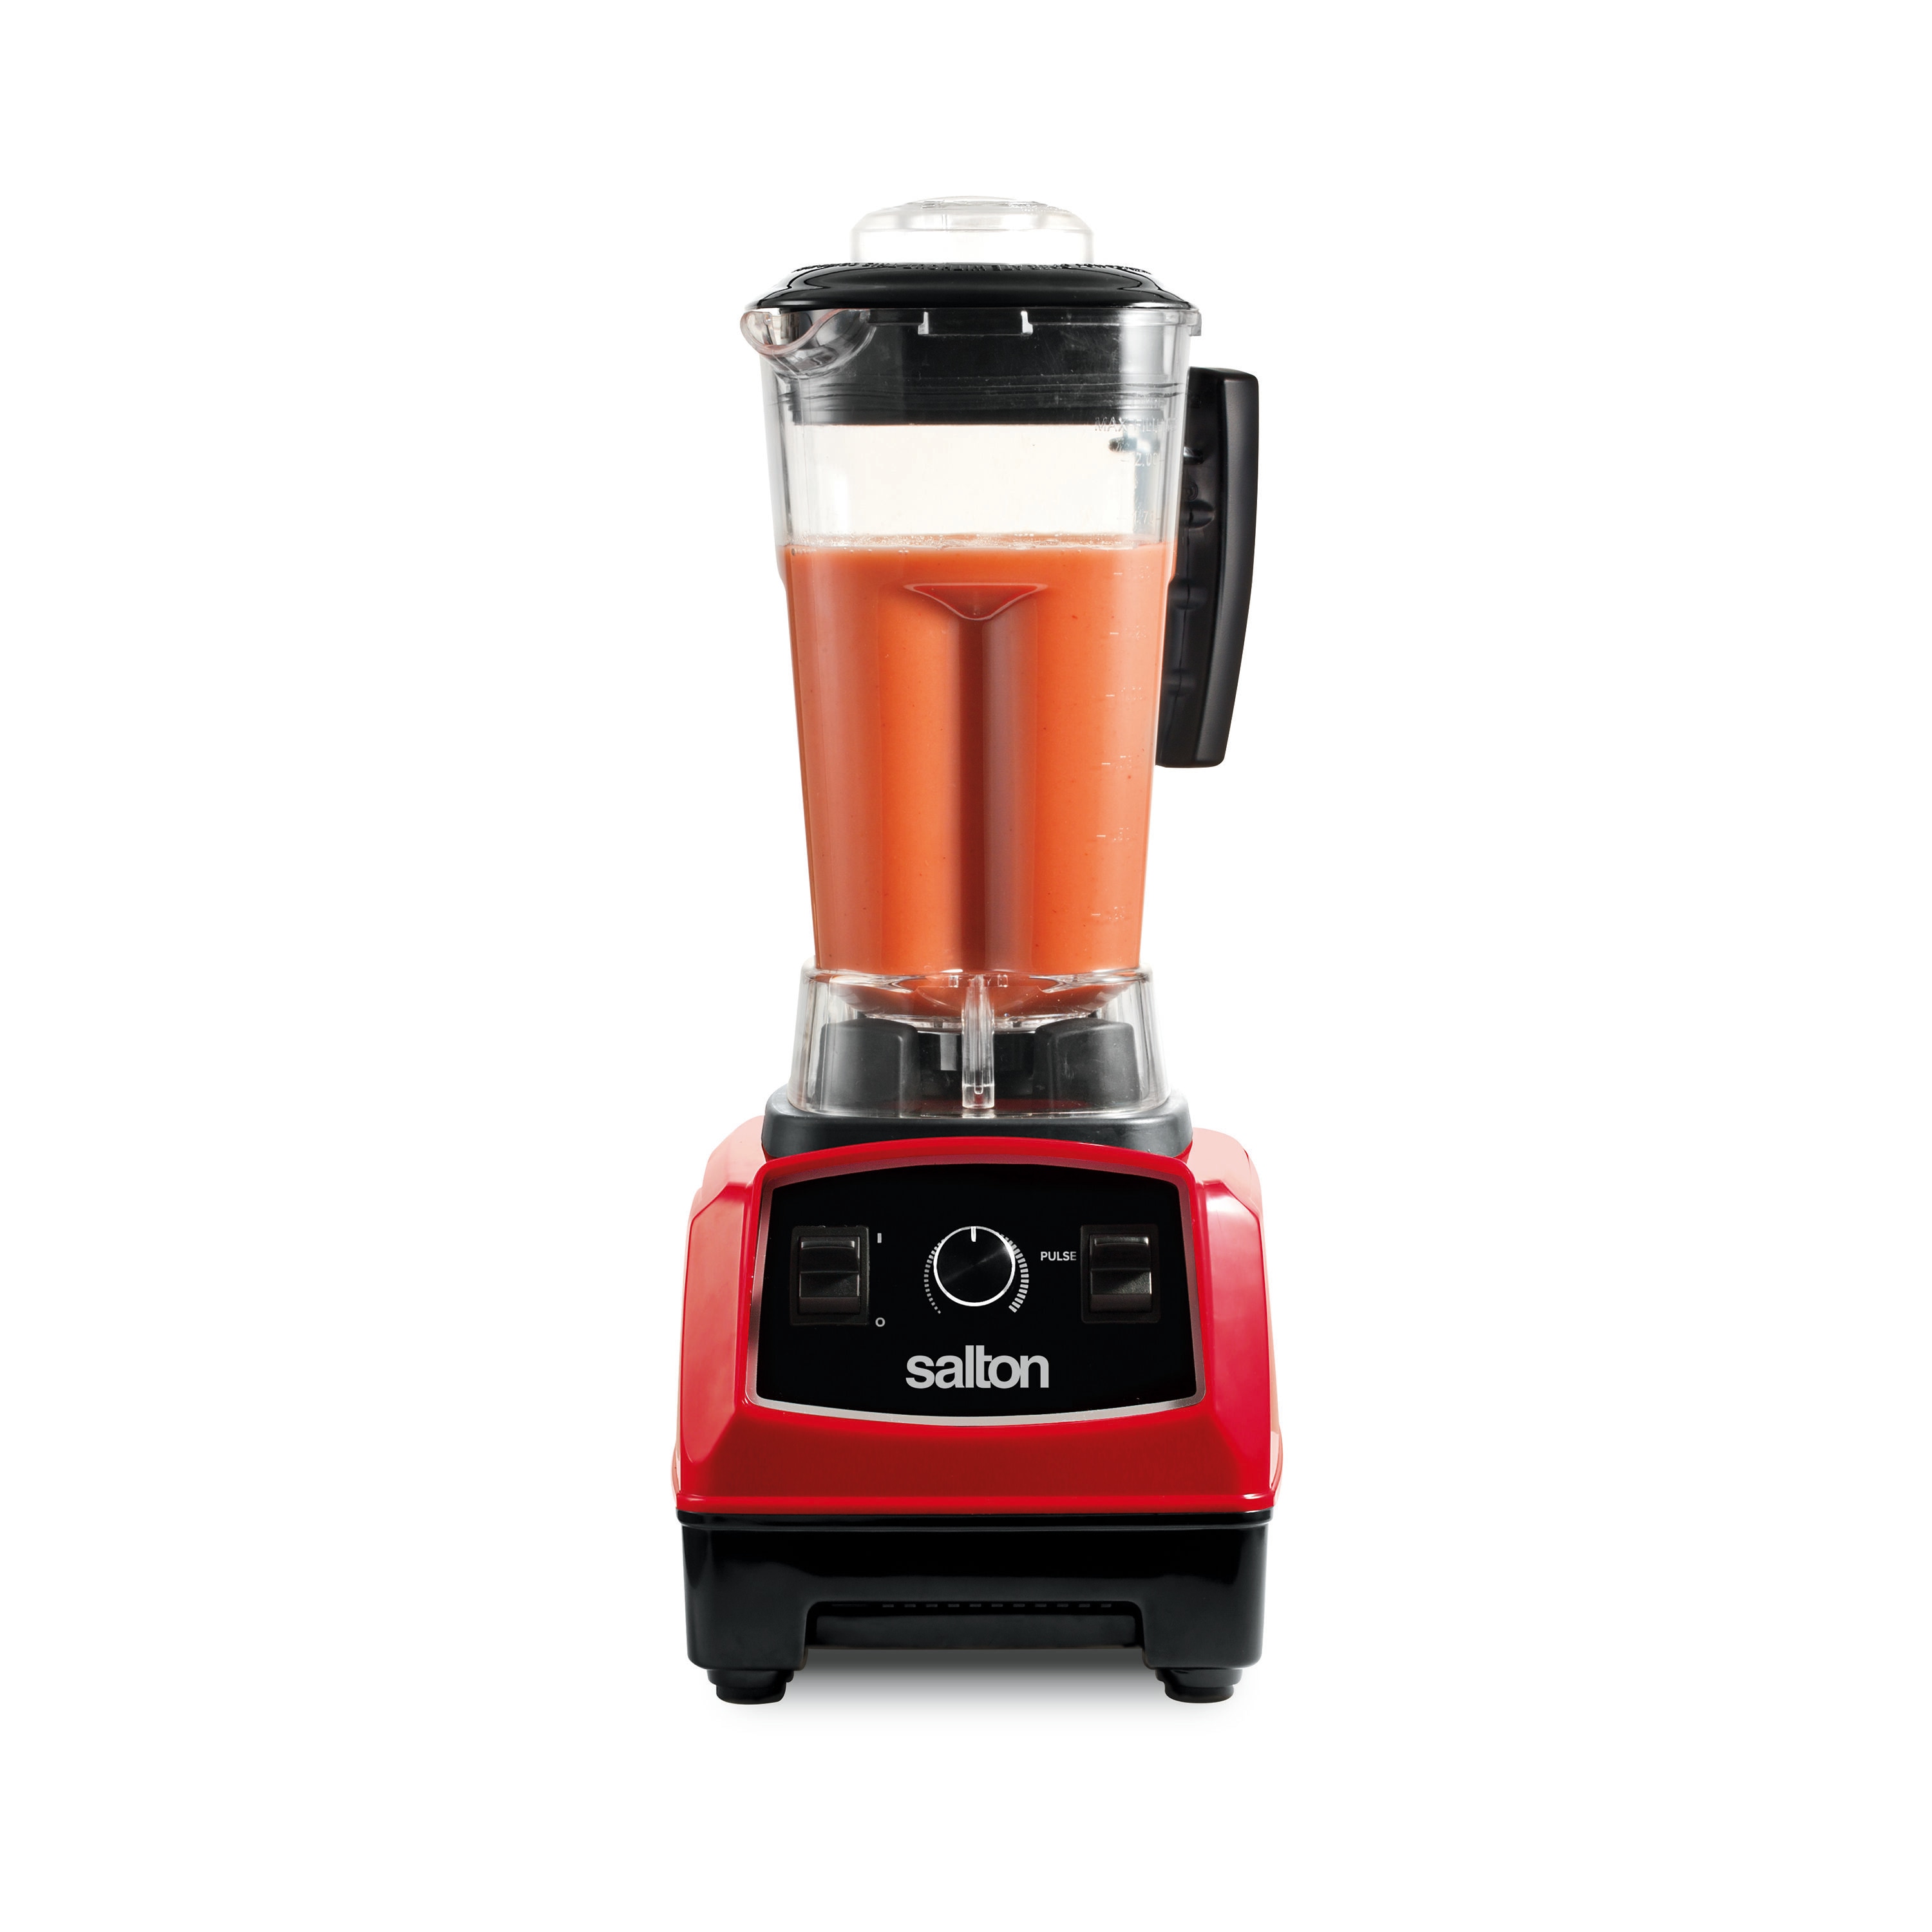 Black & Decker PB1002R Fusion Blade Personal Blender, Red for sale